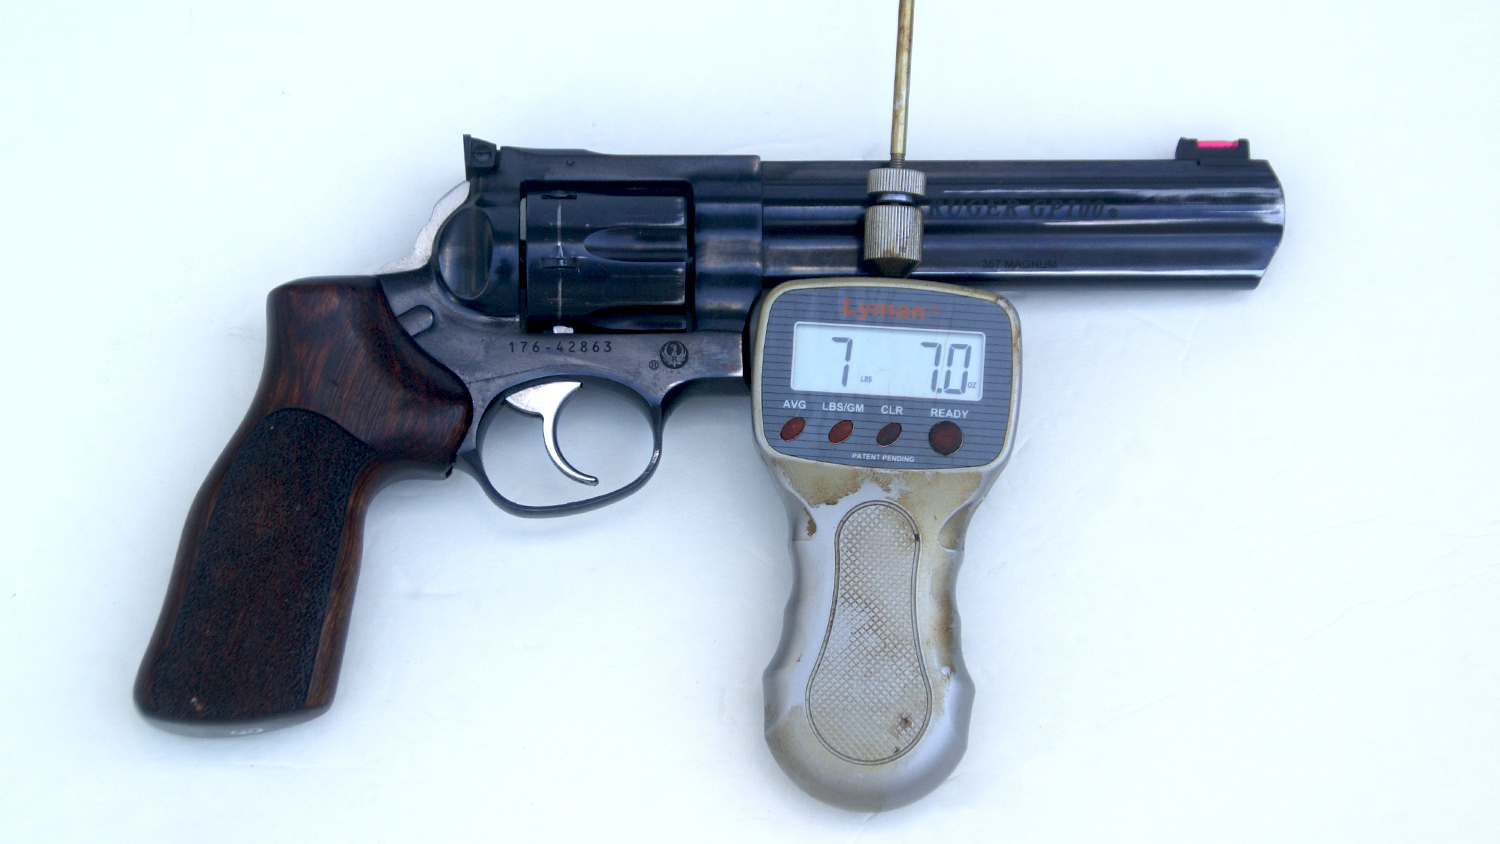 Reducing DA trigger pull weight makes revolvers more effective, but it comes with a price.